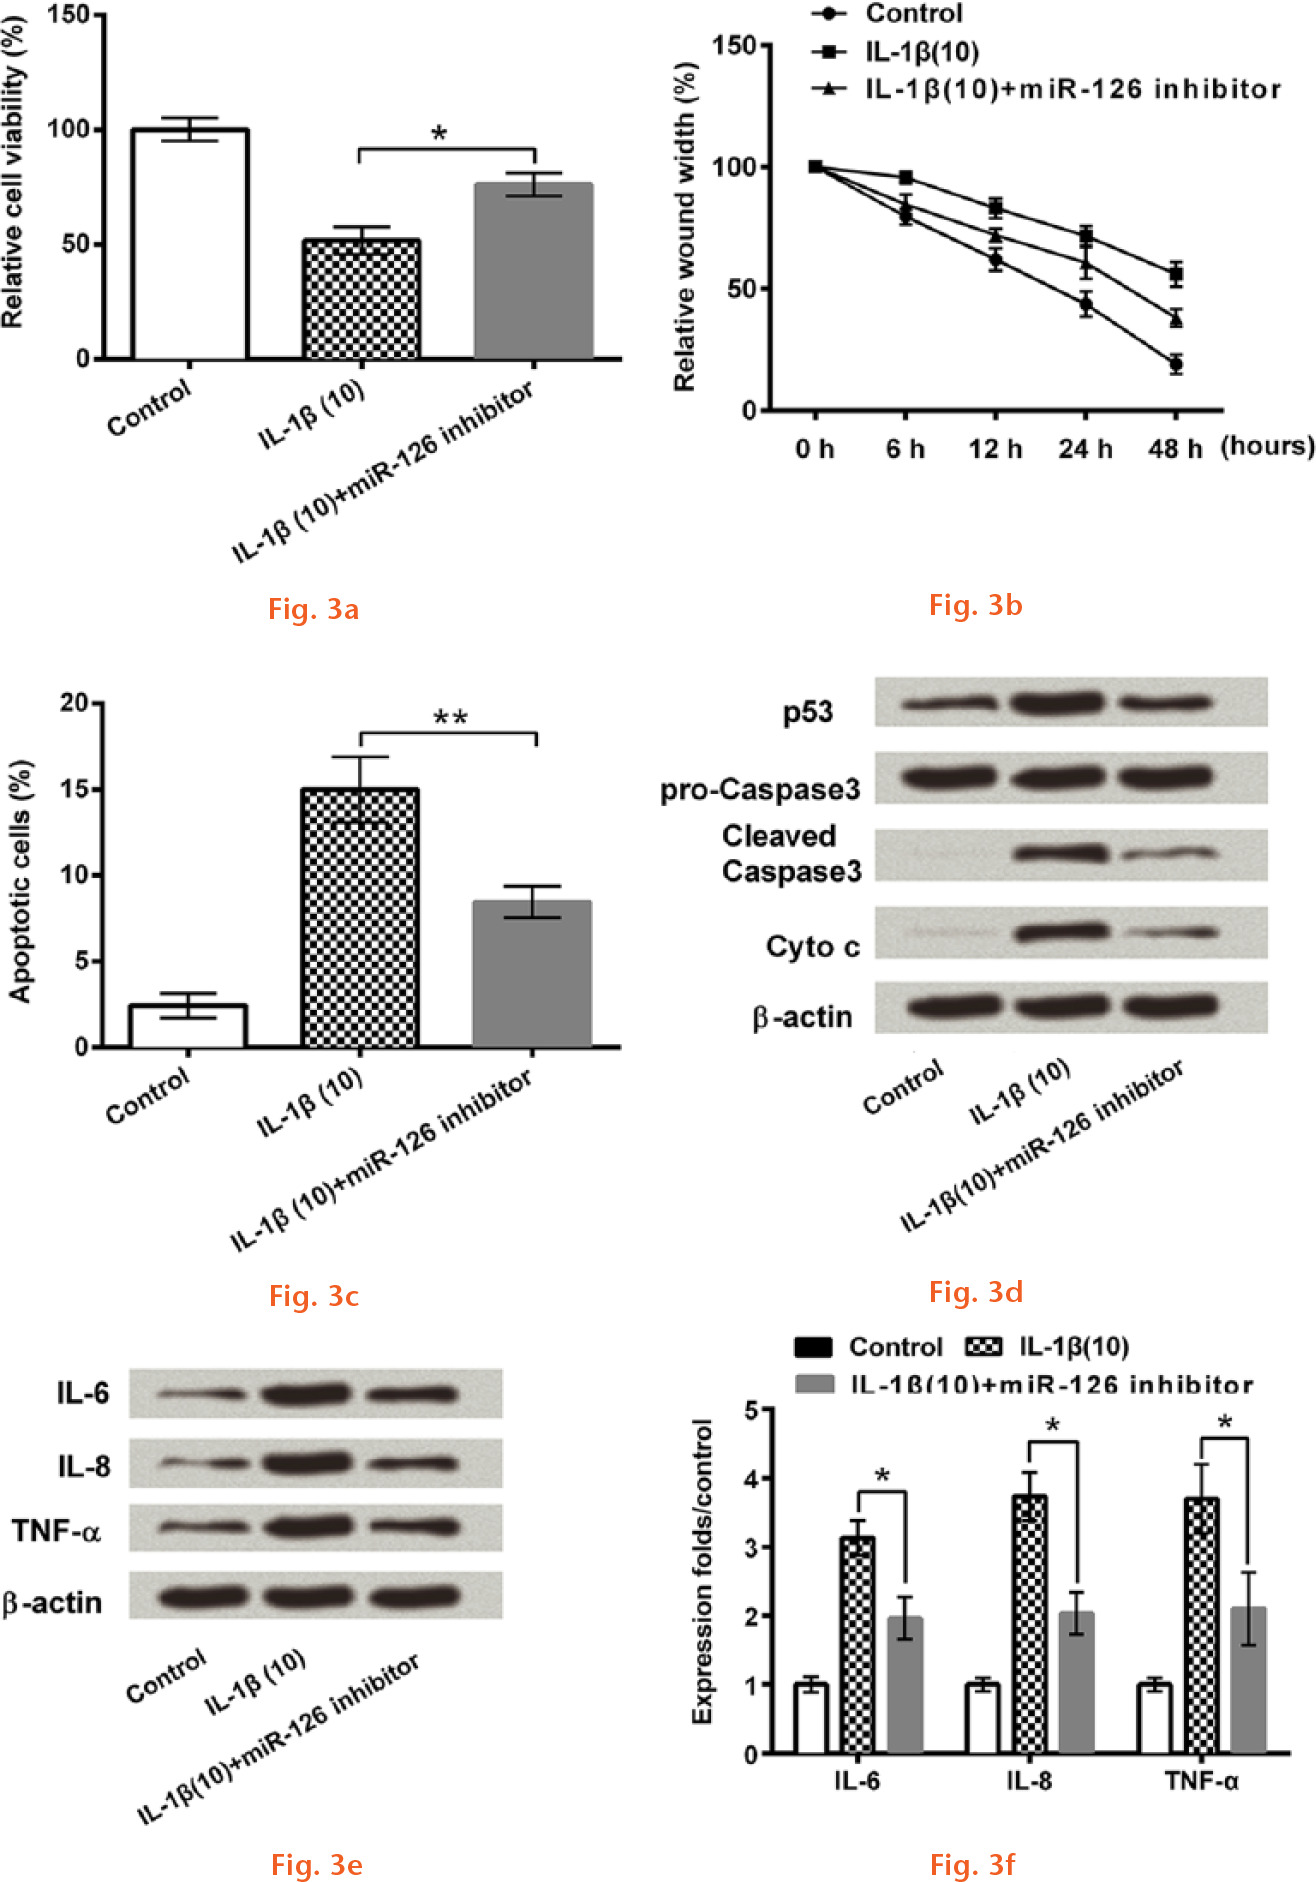  
            Inhibition of miR-126 reduced interleukin (IL)-1β-induced chondrocyte inflammation. The human chondrocyte cell line CHON-001 was administrated by IL-1β (10 ng/ml) and/or miR-126 inhibitor transfection: a) Graph showing the Cell Counting Kit-8 (CCK-8) analysis results of cell viability. b) Graph showing the relative wound width at different timepoints. c) Graph showing the relative apoptotic cells number of CHON-001 cells. The protein immunoblots of: d) apoptosis-related factors, including Cytochrome C (Cyto C), Caspase 3, and p53, in CHON-001 cells; and e) pro-inflammatory cytokines (IL-6, IL-8, and tumour necrosis factor (TNF)-α) by Western blot assay. f) Graph showing the relative expression levels of IL-6, IL-8, and TNF-α. β-actin acted as an internal control (*p < 0.05; **p < 0.01).
          